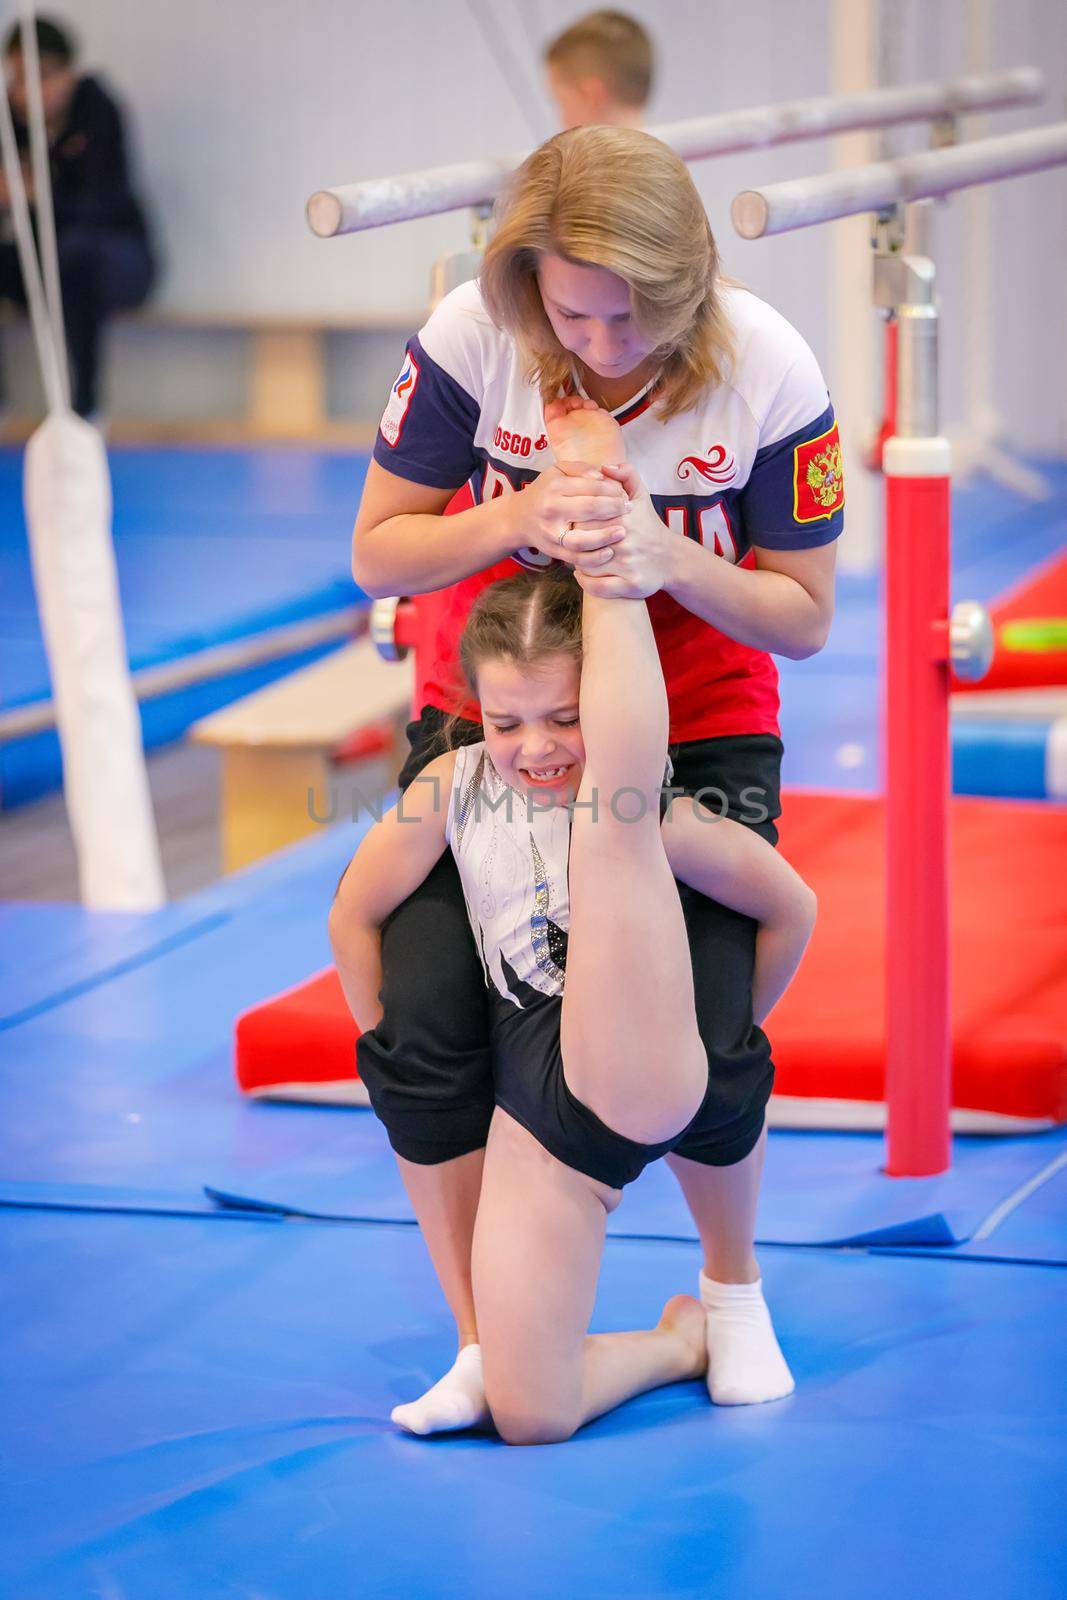 Gymnastics coach stretches a young athlete in the gym. Stretching the legs and arms. The coach prepares the gymnast for the competition. Moscow, Russia September 18, 2019